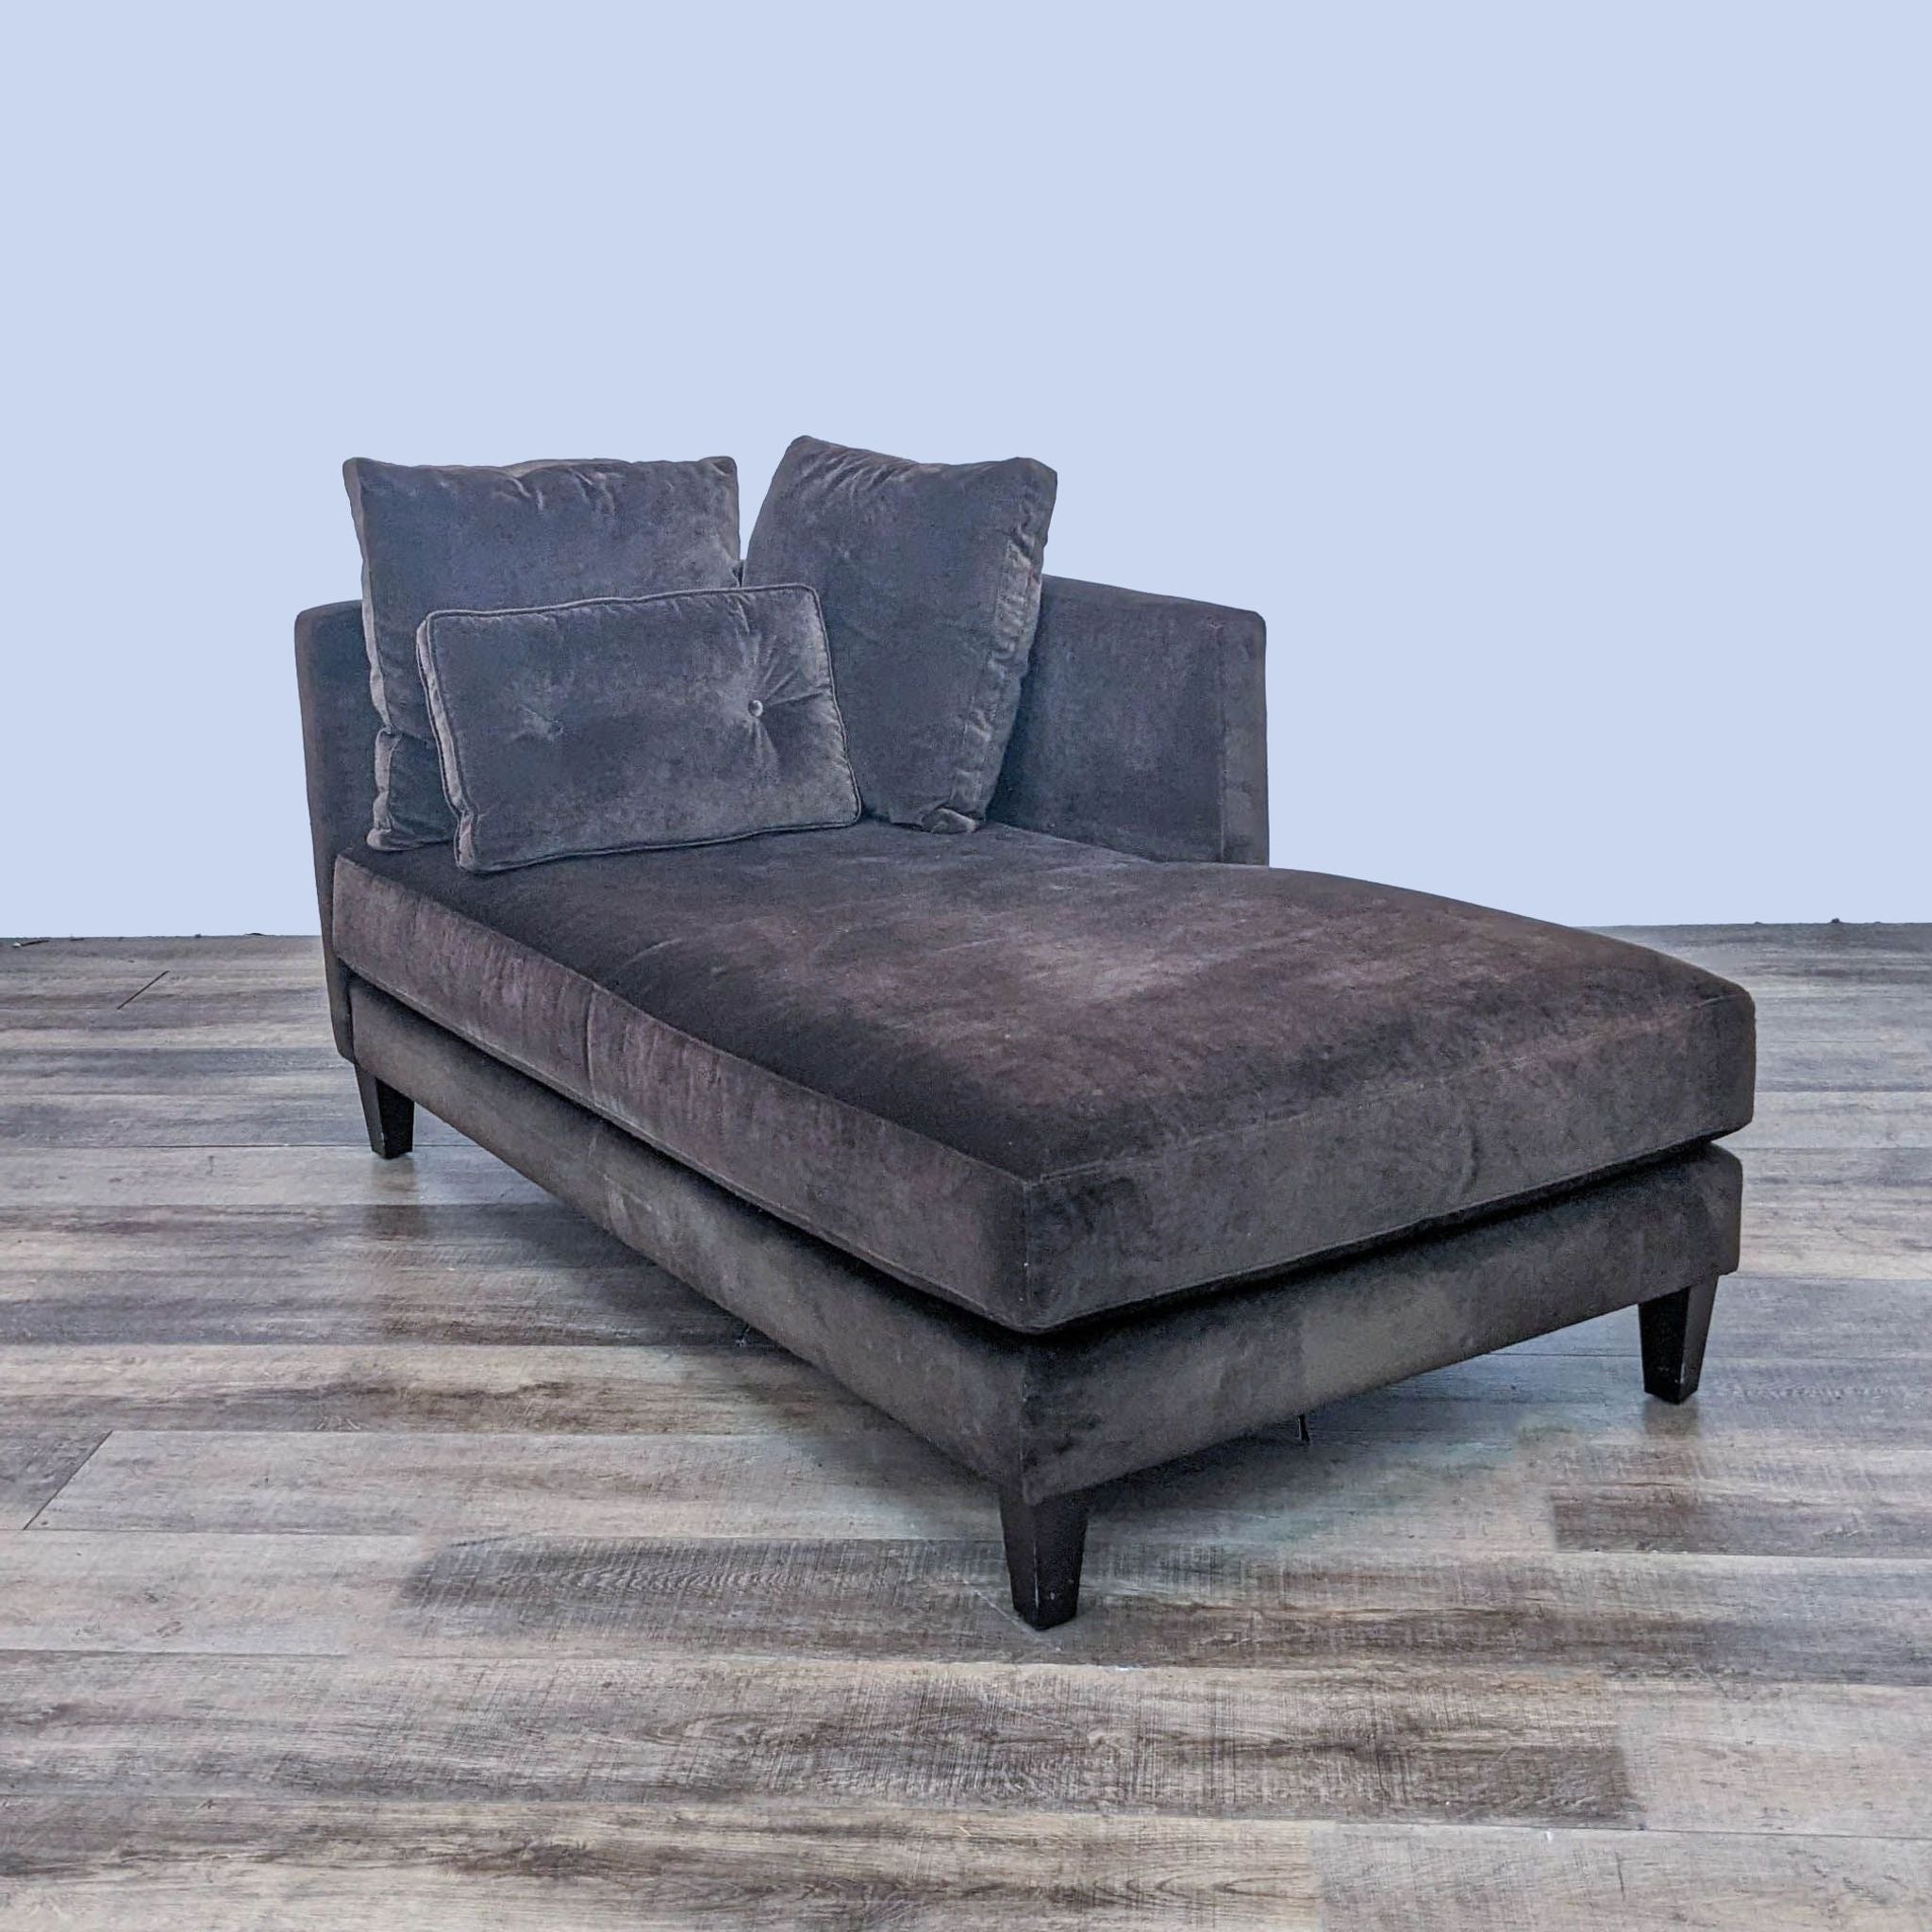 Crate & Barrel modern chaise with plush brown fabric, right-facing arm bench, and elegant dark wooden legs.